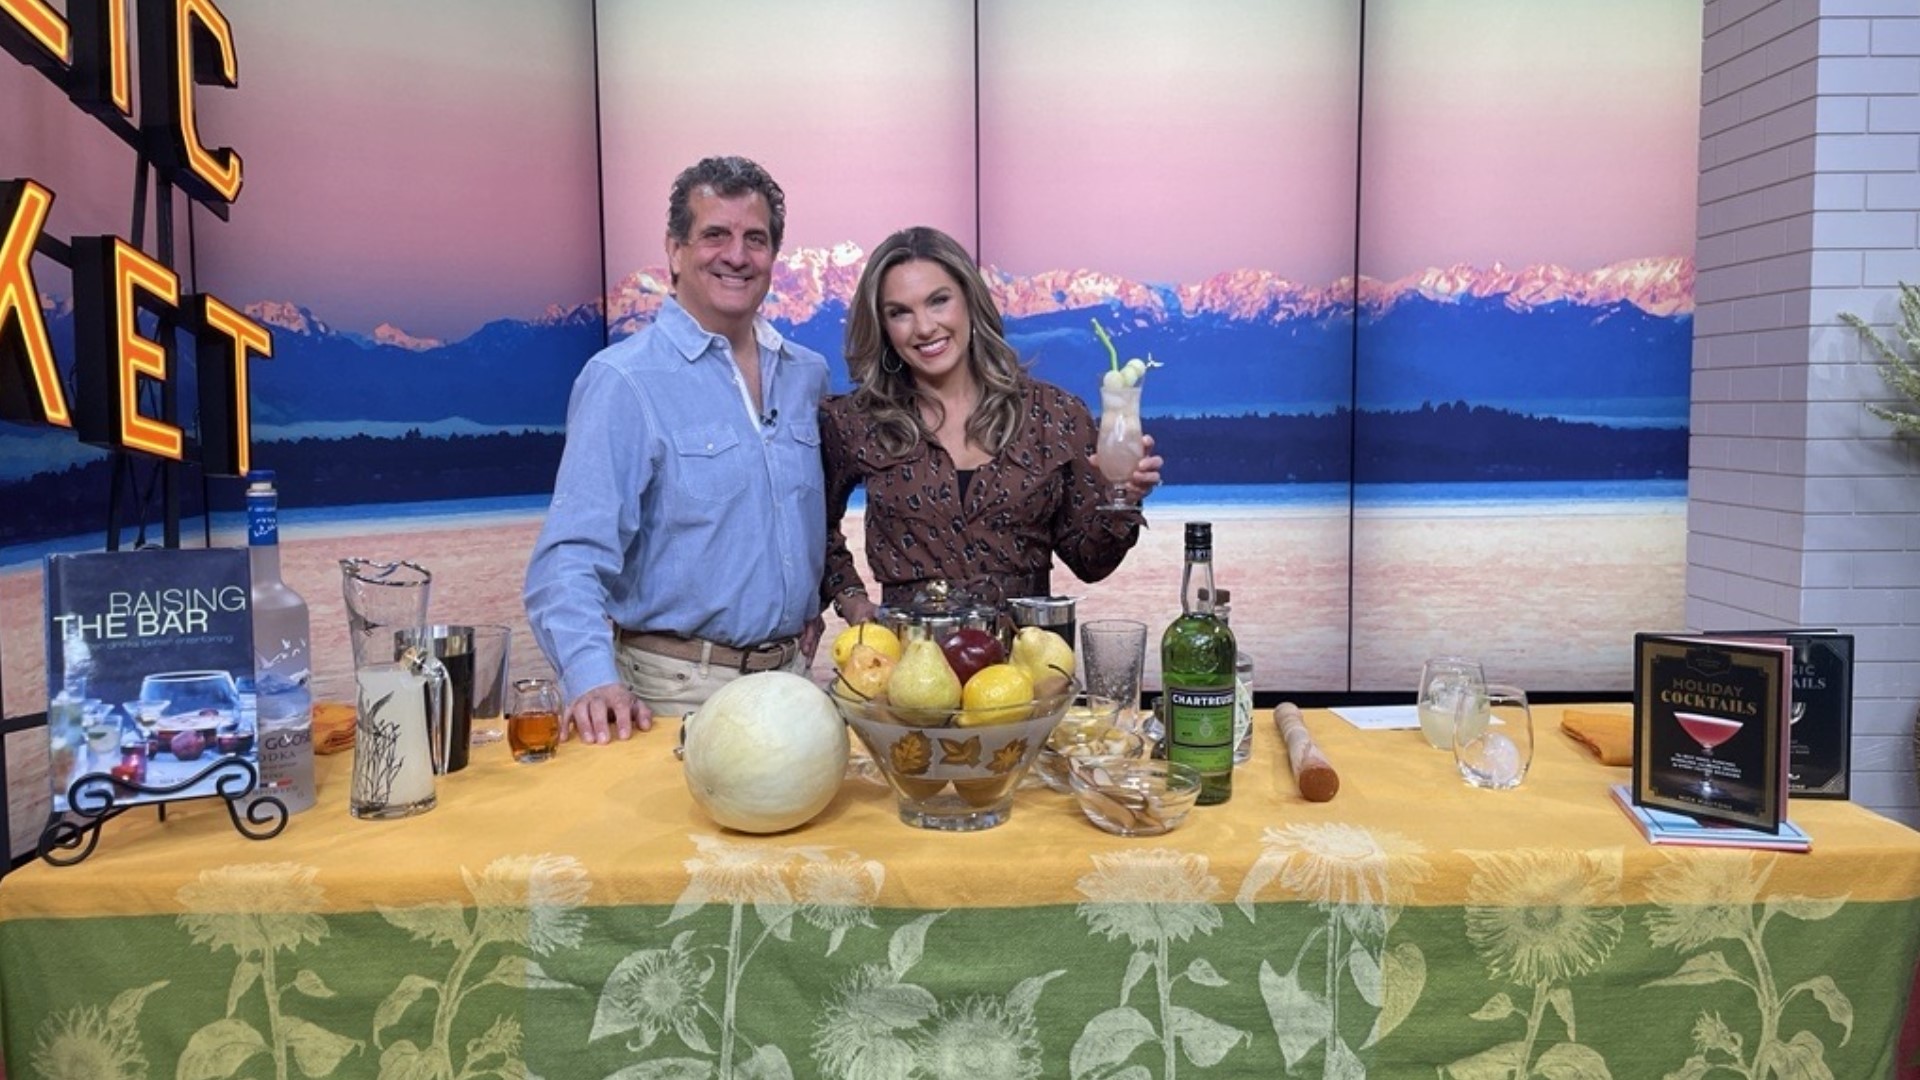 Nick Mautone, creator of the cocktail, lives on Mercer Island, so he joined New Day to show us how to make the Honey Deuce! #newdaynw